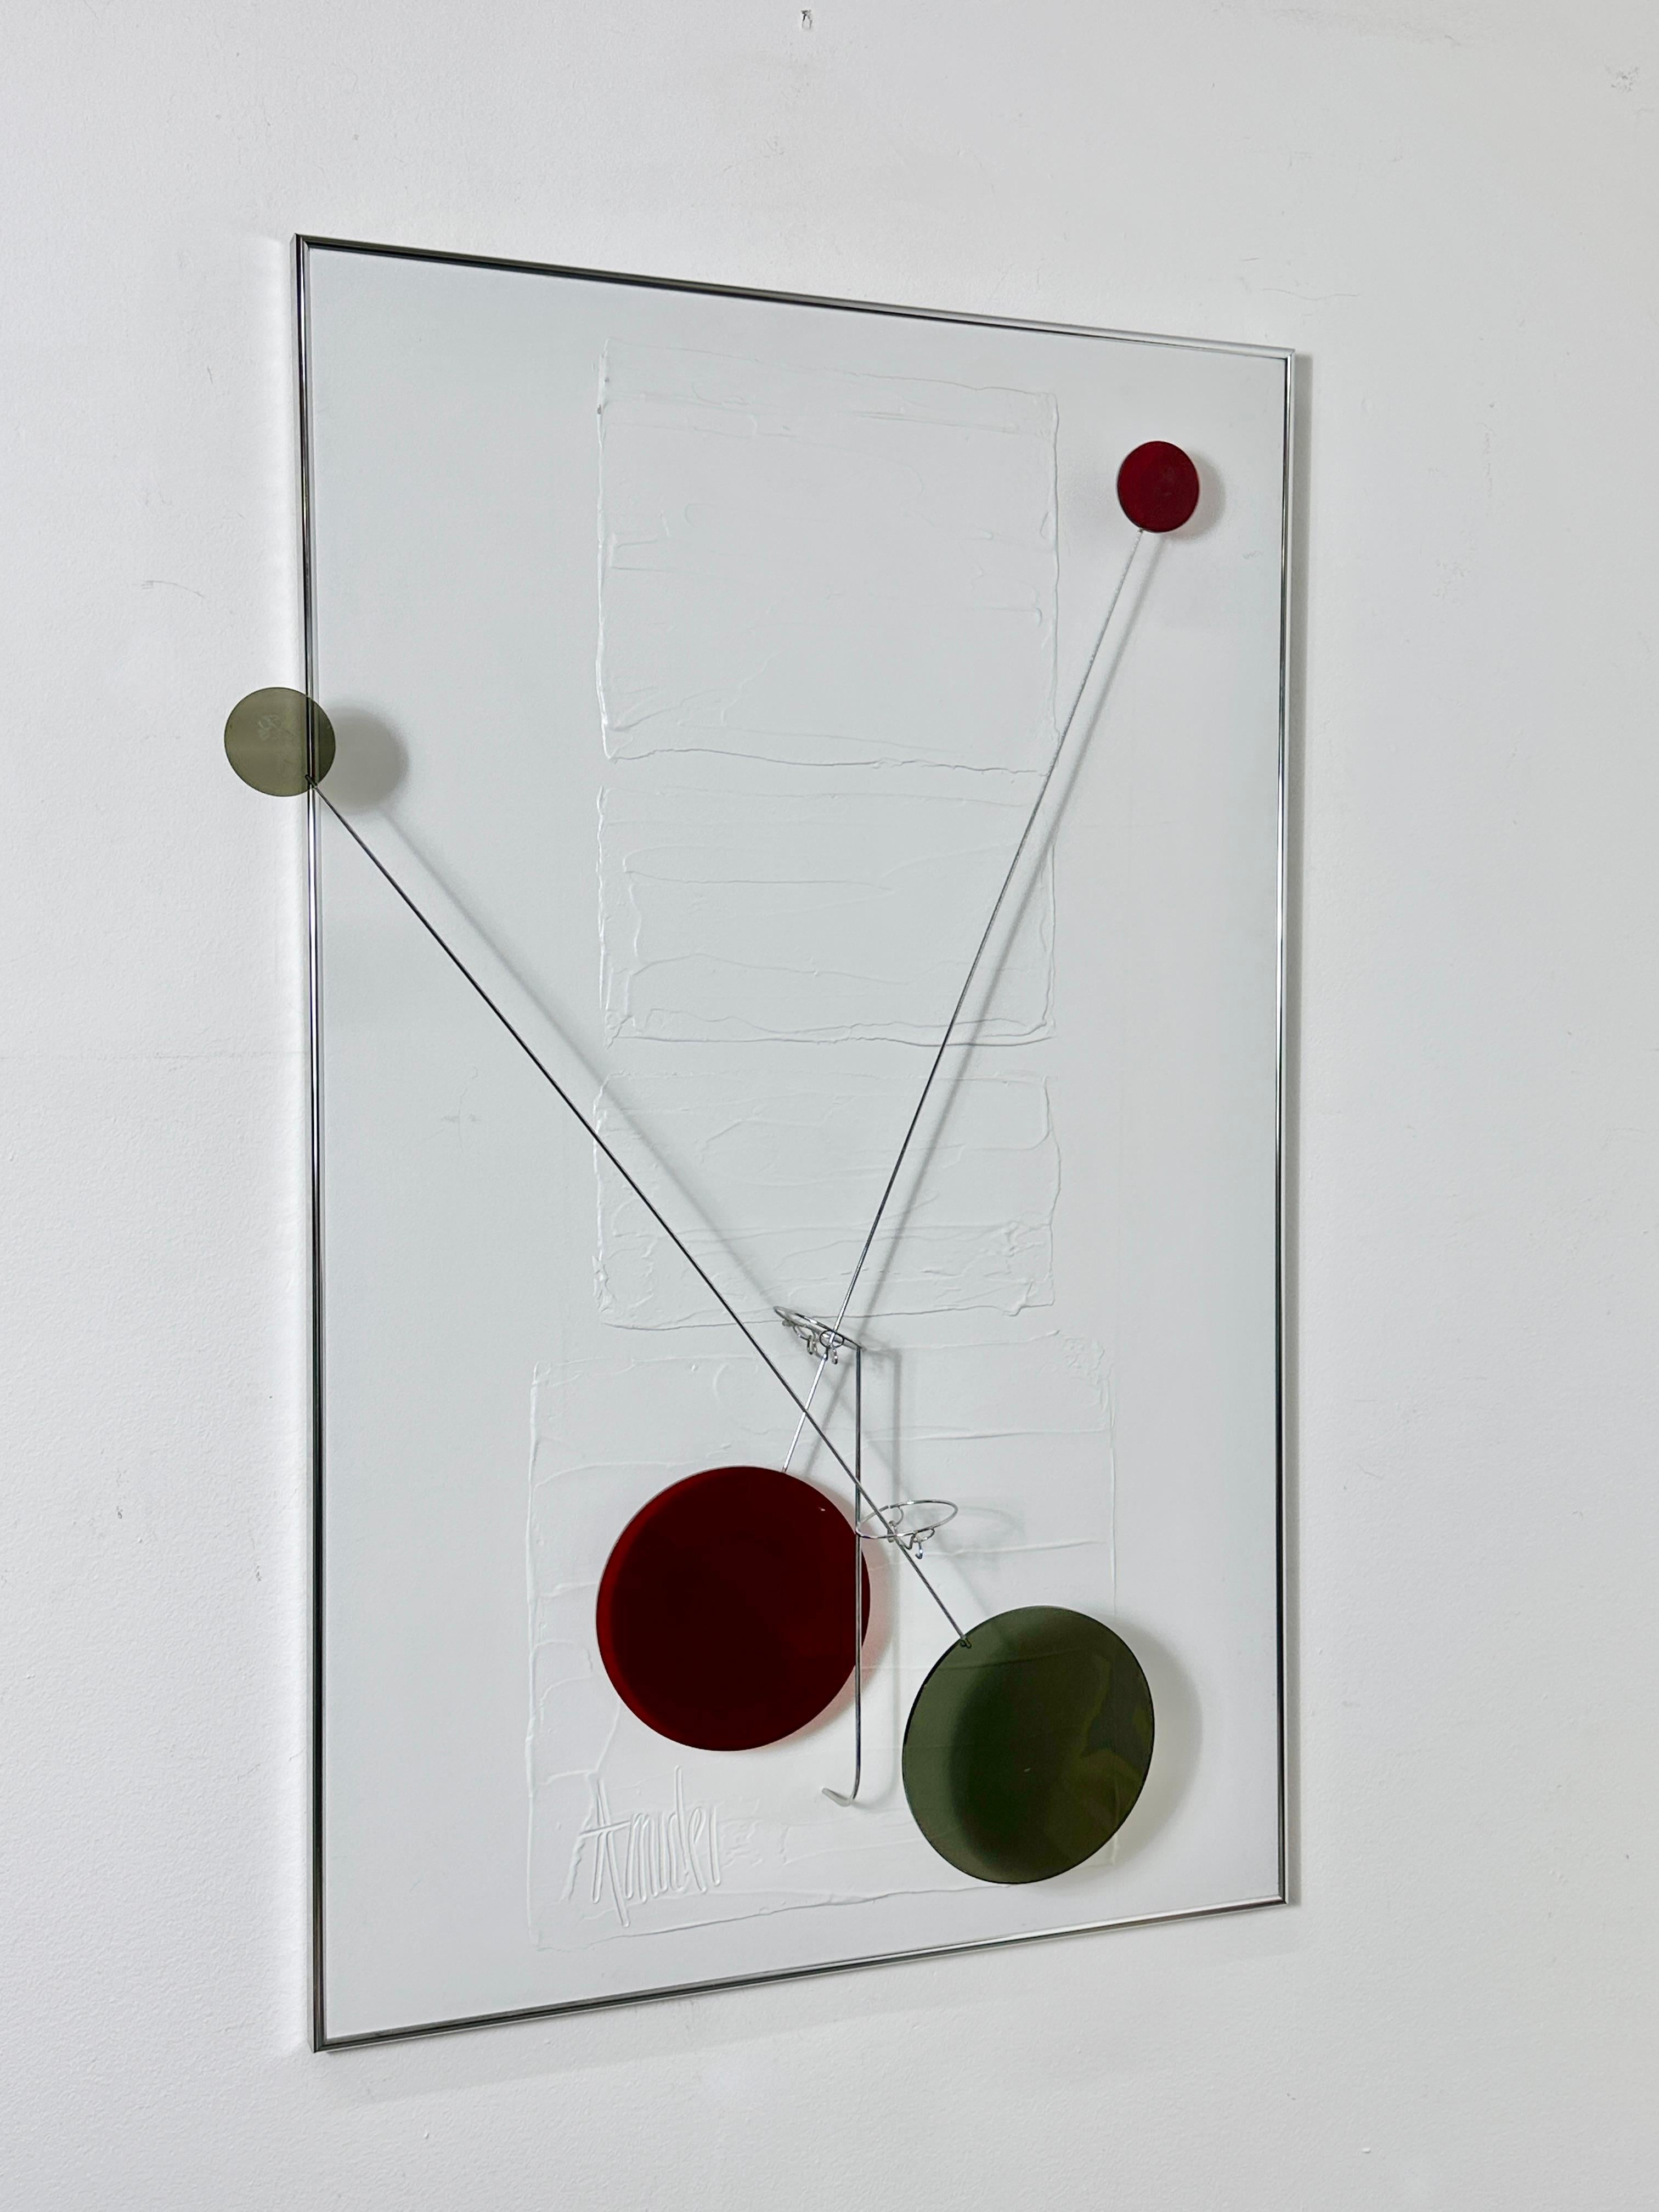 American Vintage Modern Contemporary Kinetic Art Mobile Wall Sculpture by Amidei 1980s For Sale